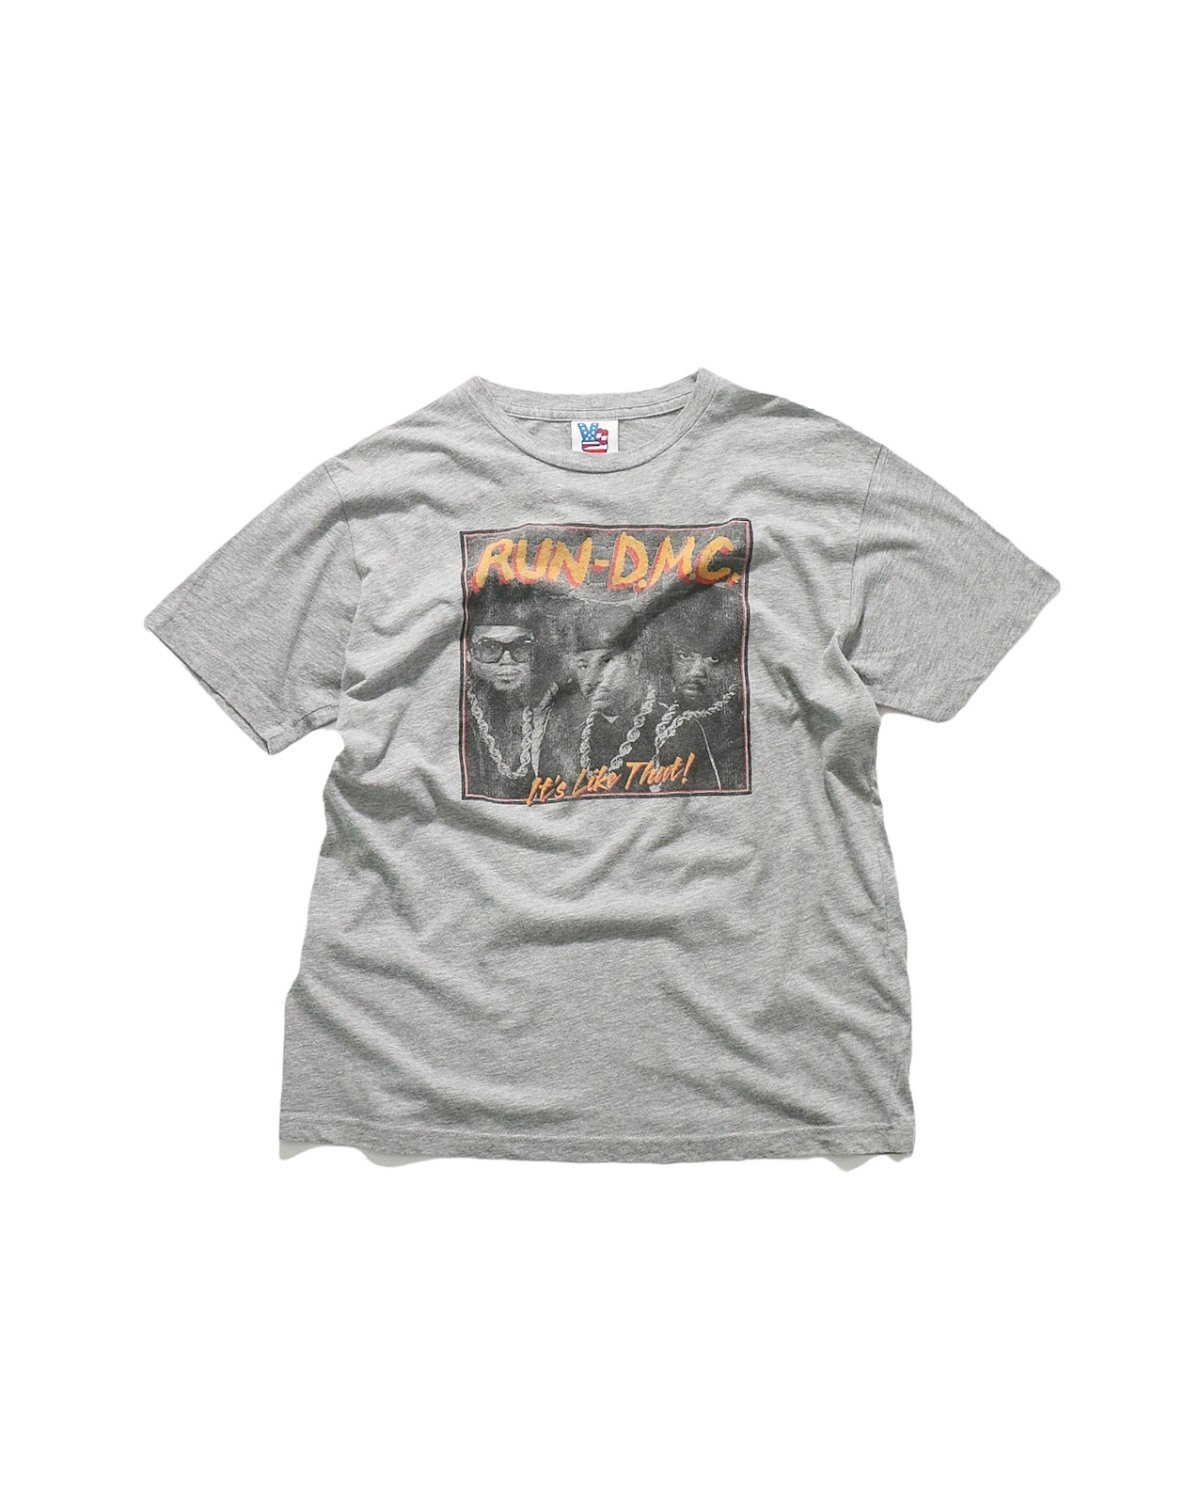 “JUNK FOOD” RUN-D.M.C S/S Tee (Made in USA)